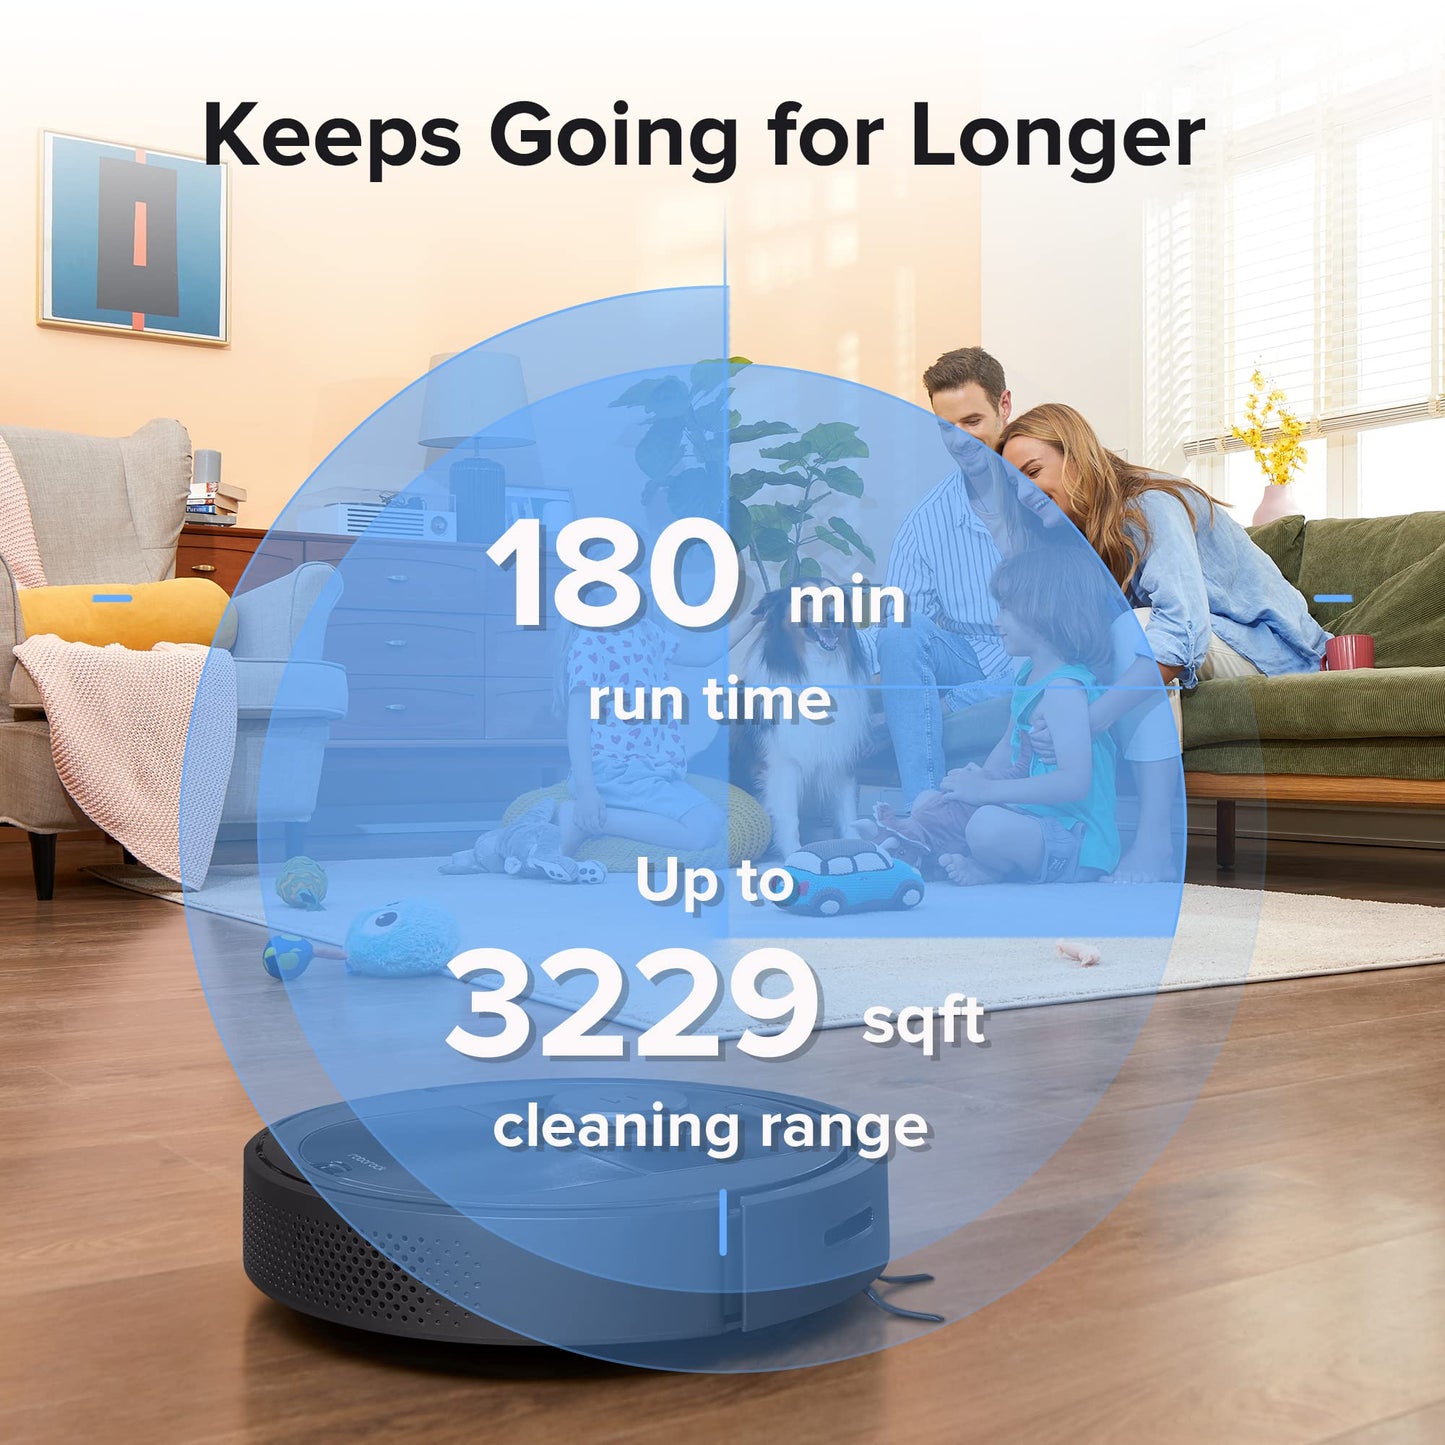 roborock Q5+ Robot Vacuum with Self-Empty Dock, Hands-Free Cleaning for up to 7 Weeks, 2700Pa Max Suction,